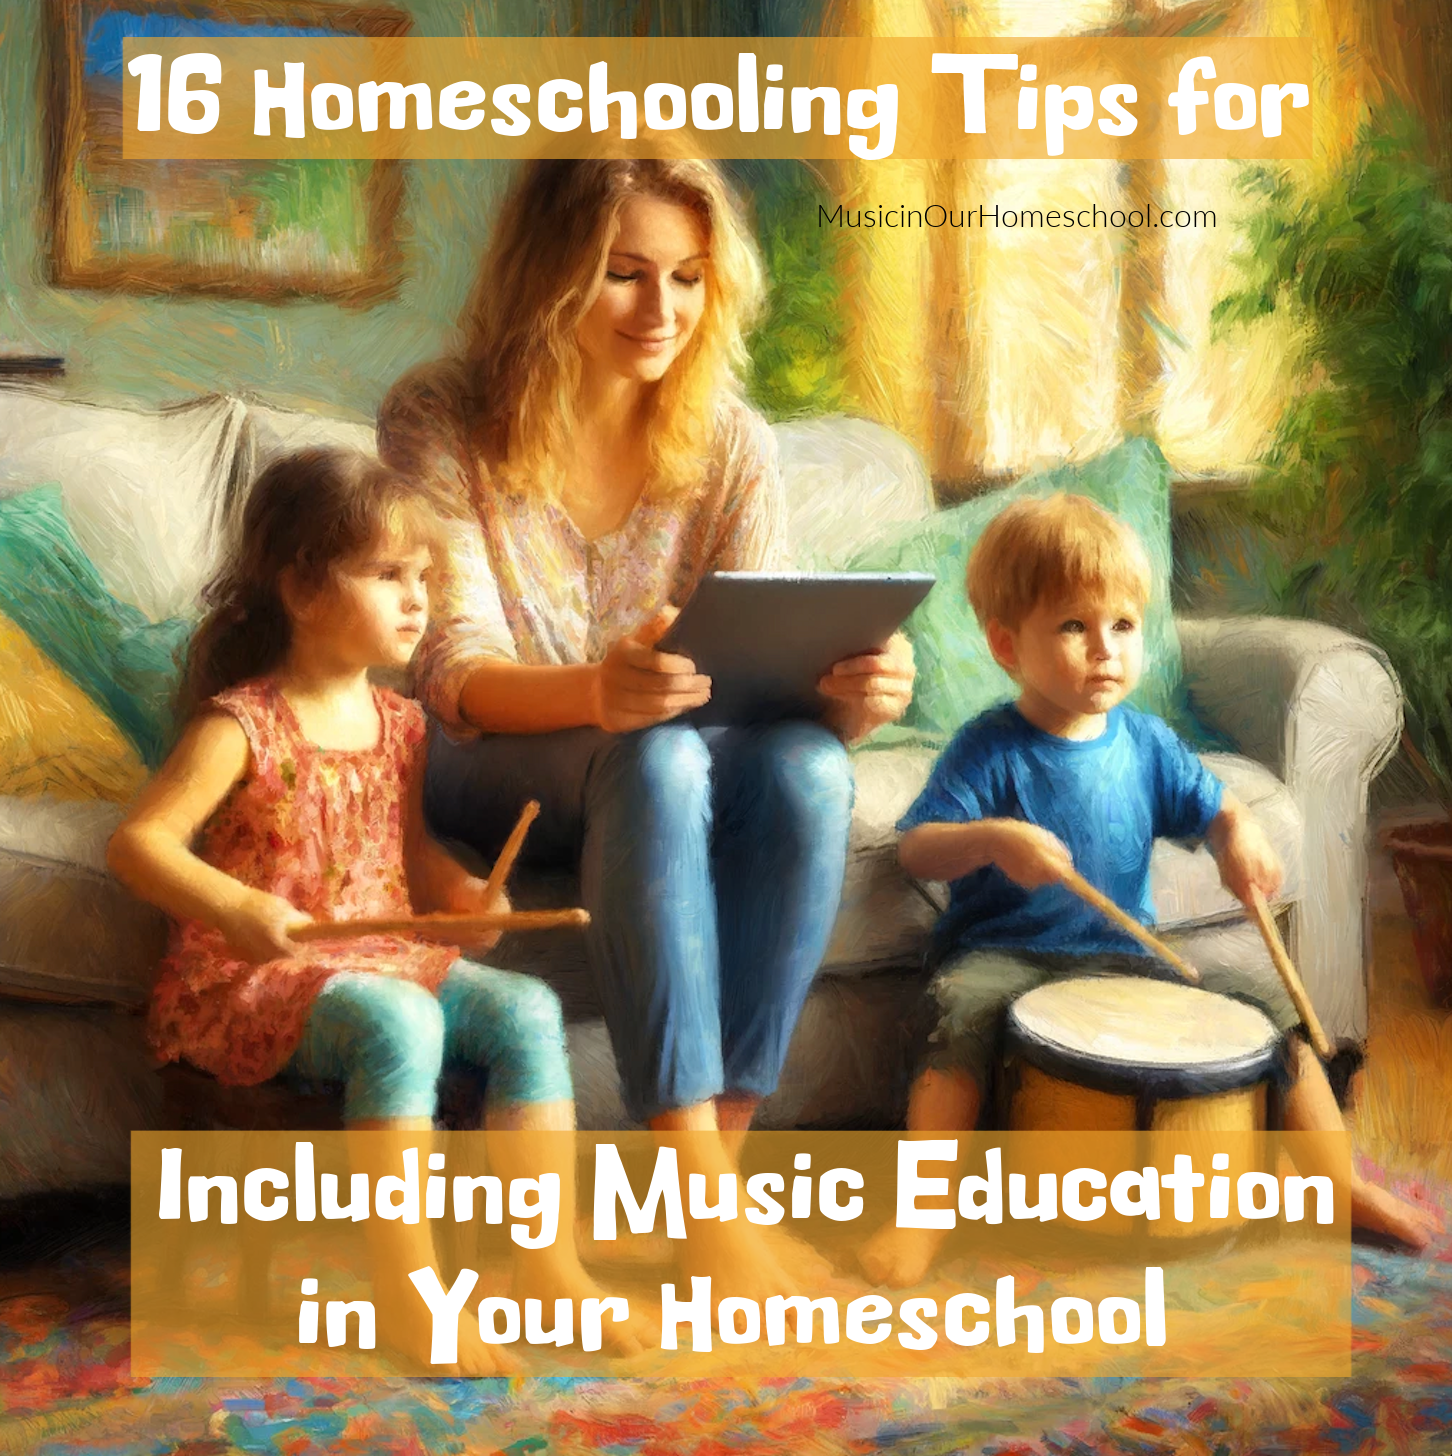 16 Homeschooling Tips for Including music education in your homeschool